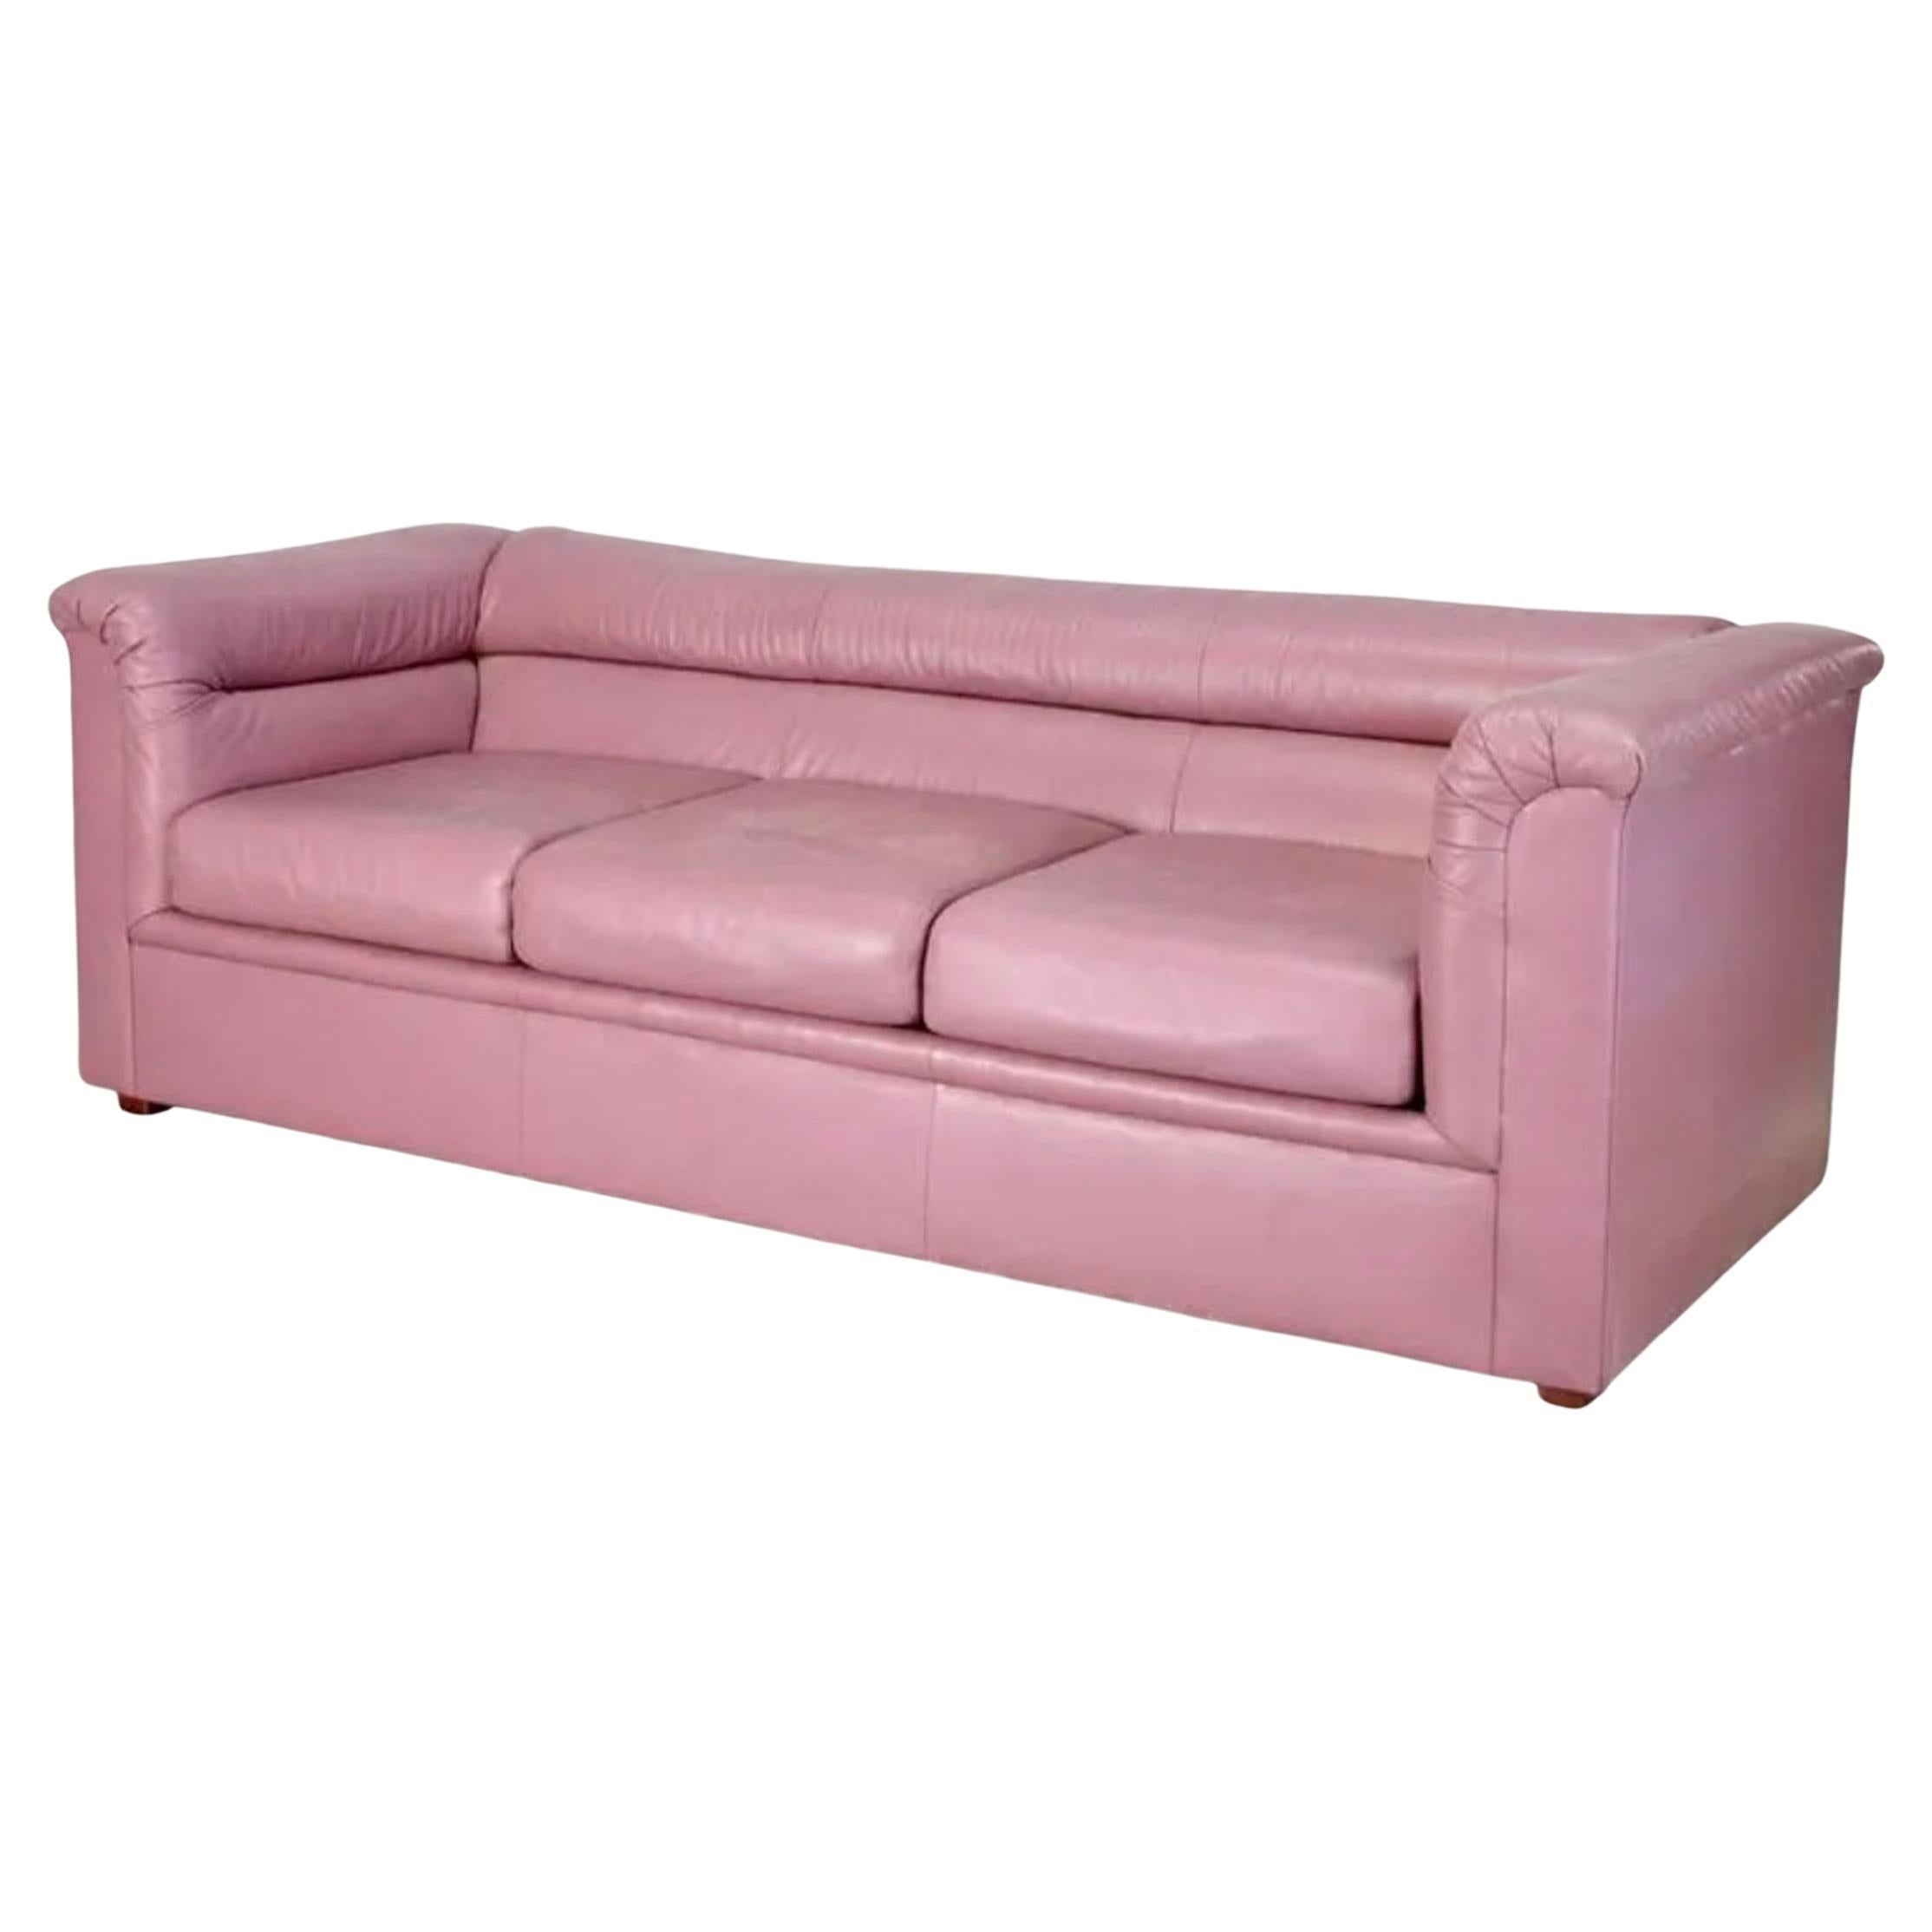 Midcentury Post Modern 3 Seat Mauve Pink Leather Puffy Sofa 1980s Selig